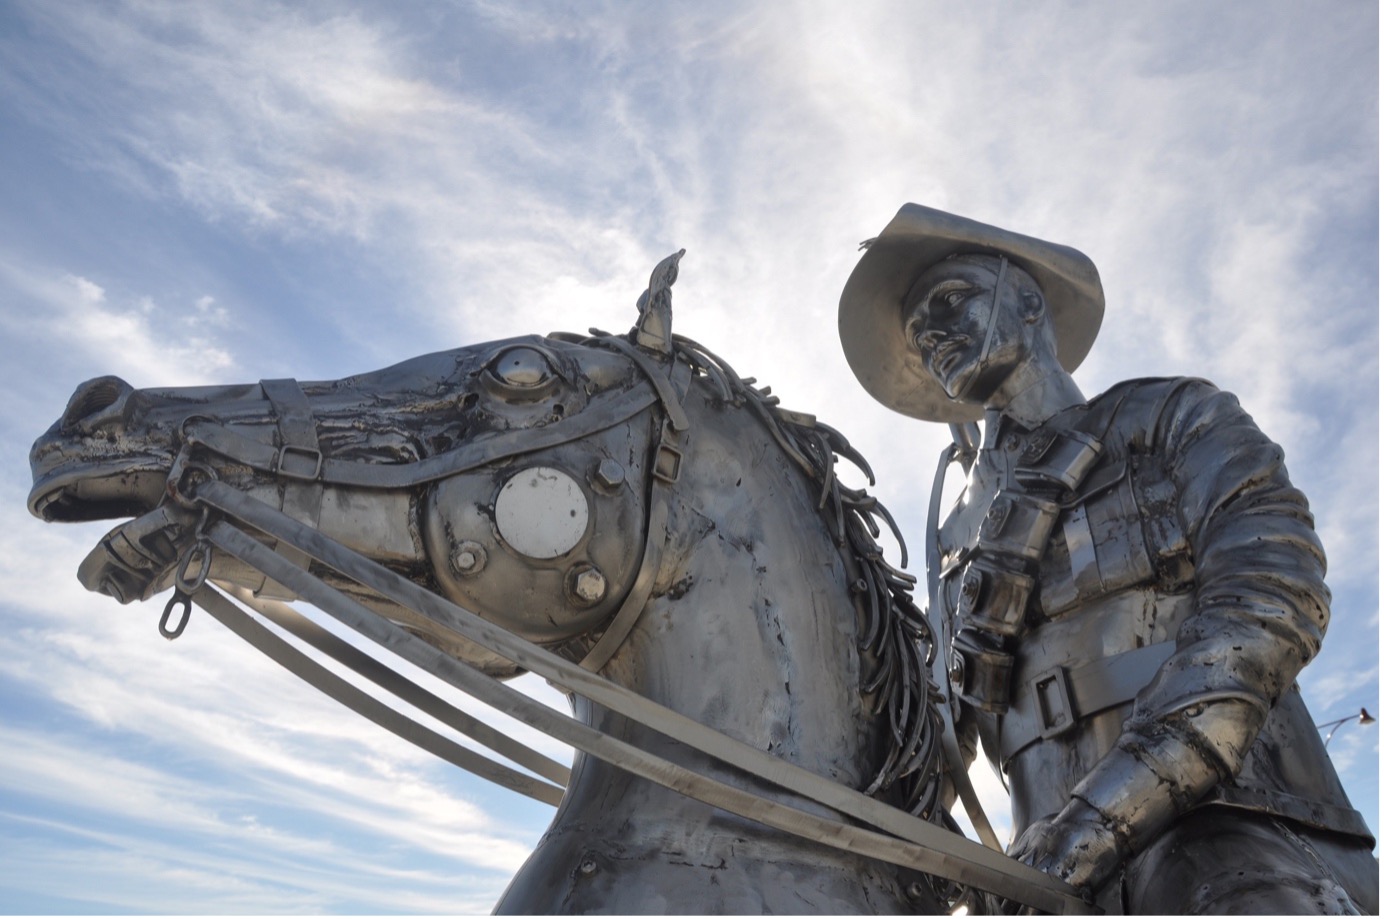 VEEM doesn’t horse around with recycled steel sculpture of 10th Light Horseman